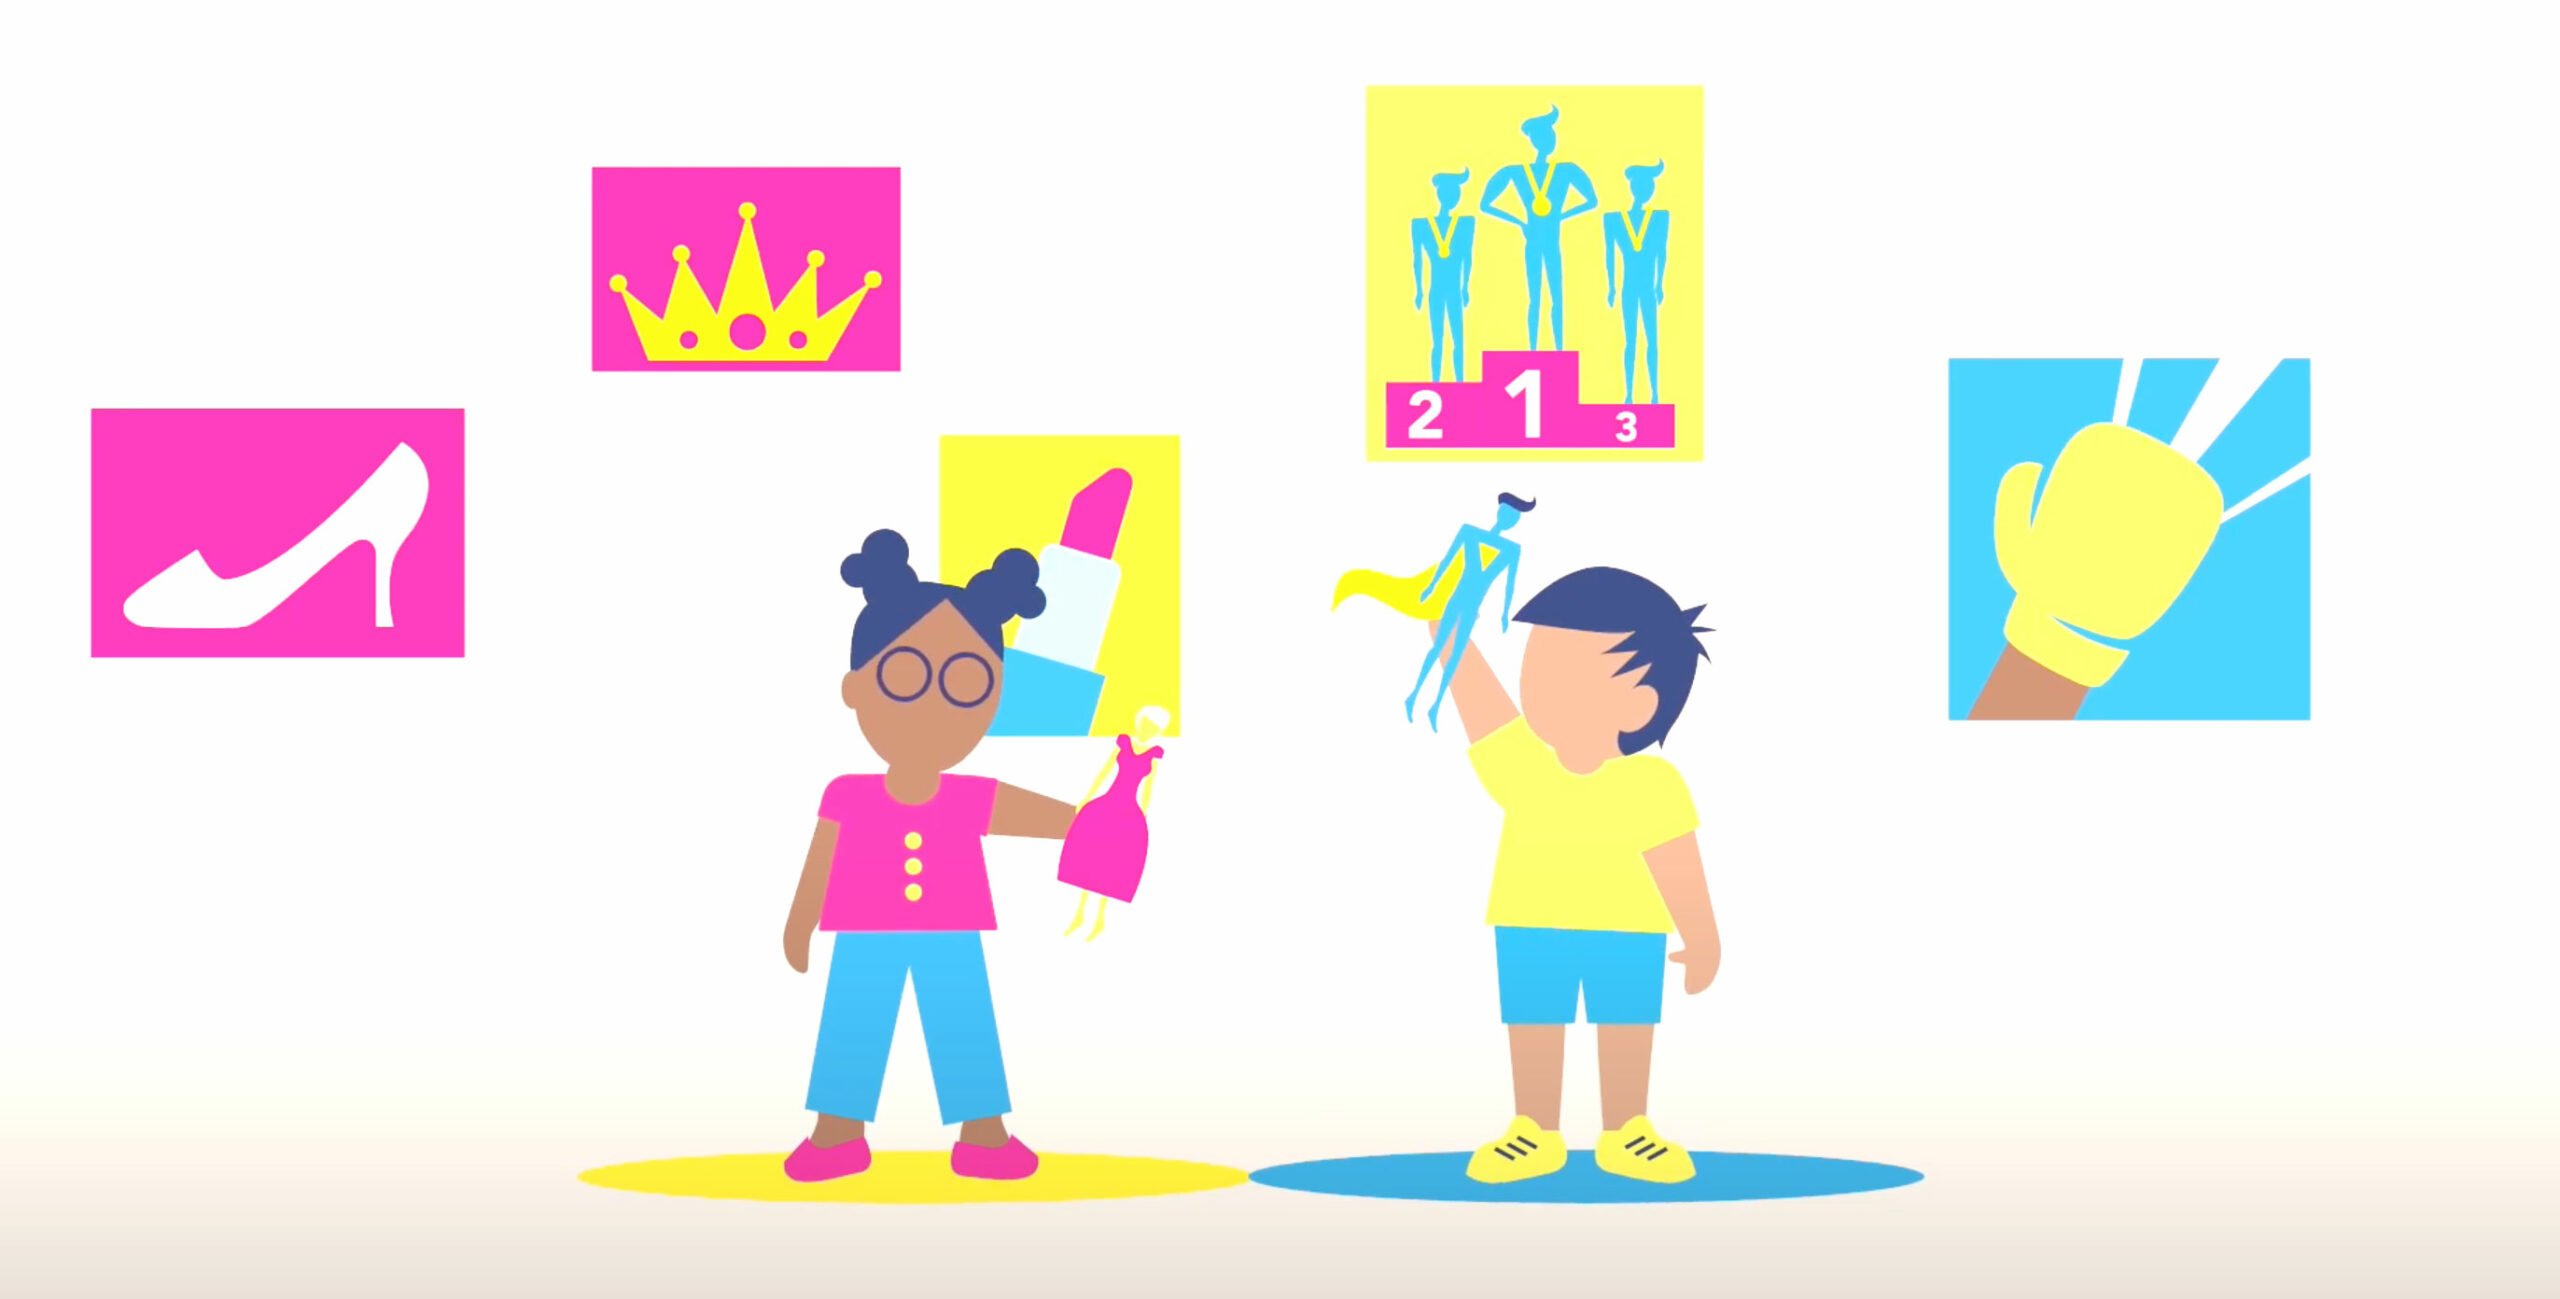 Two children standing in front of traditionally gendered pictures; the girl is playing with a doll in a dress and standing in front of a picture of lipstick, another of a crown, and a third of a high heel shoe; the boy is plyaing with a super hero doll and standing in front of an image of a boxing glove plus another of masculine athletes on a podium